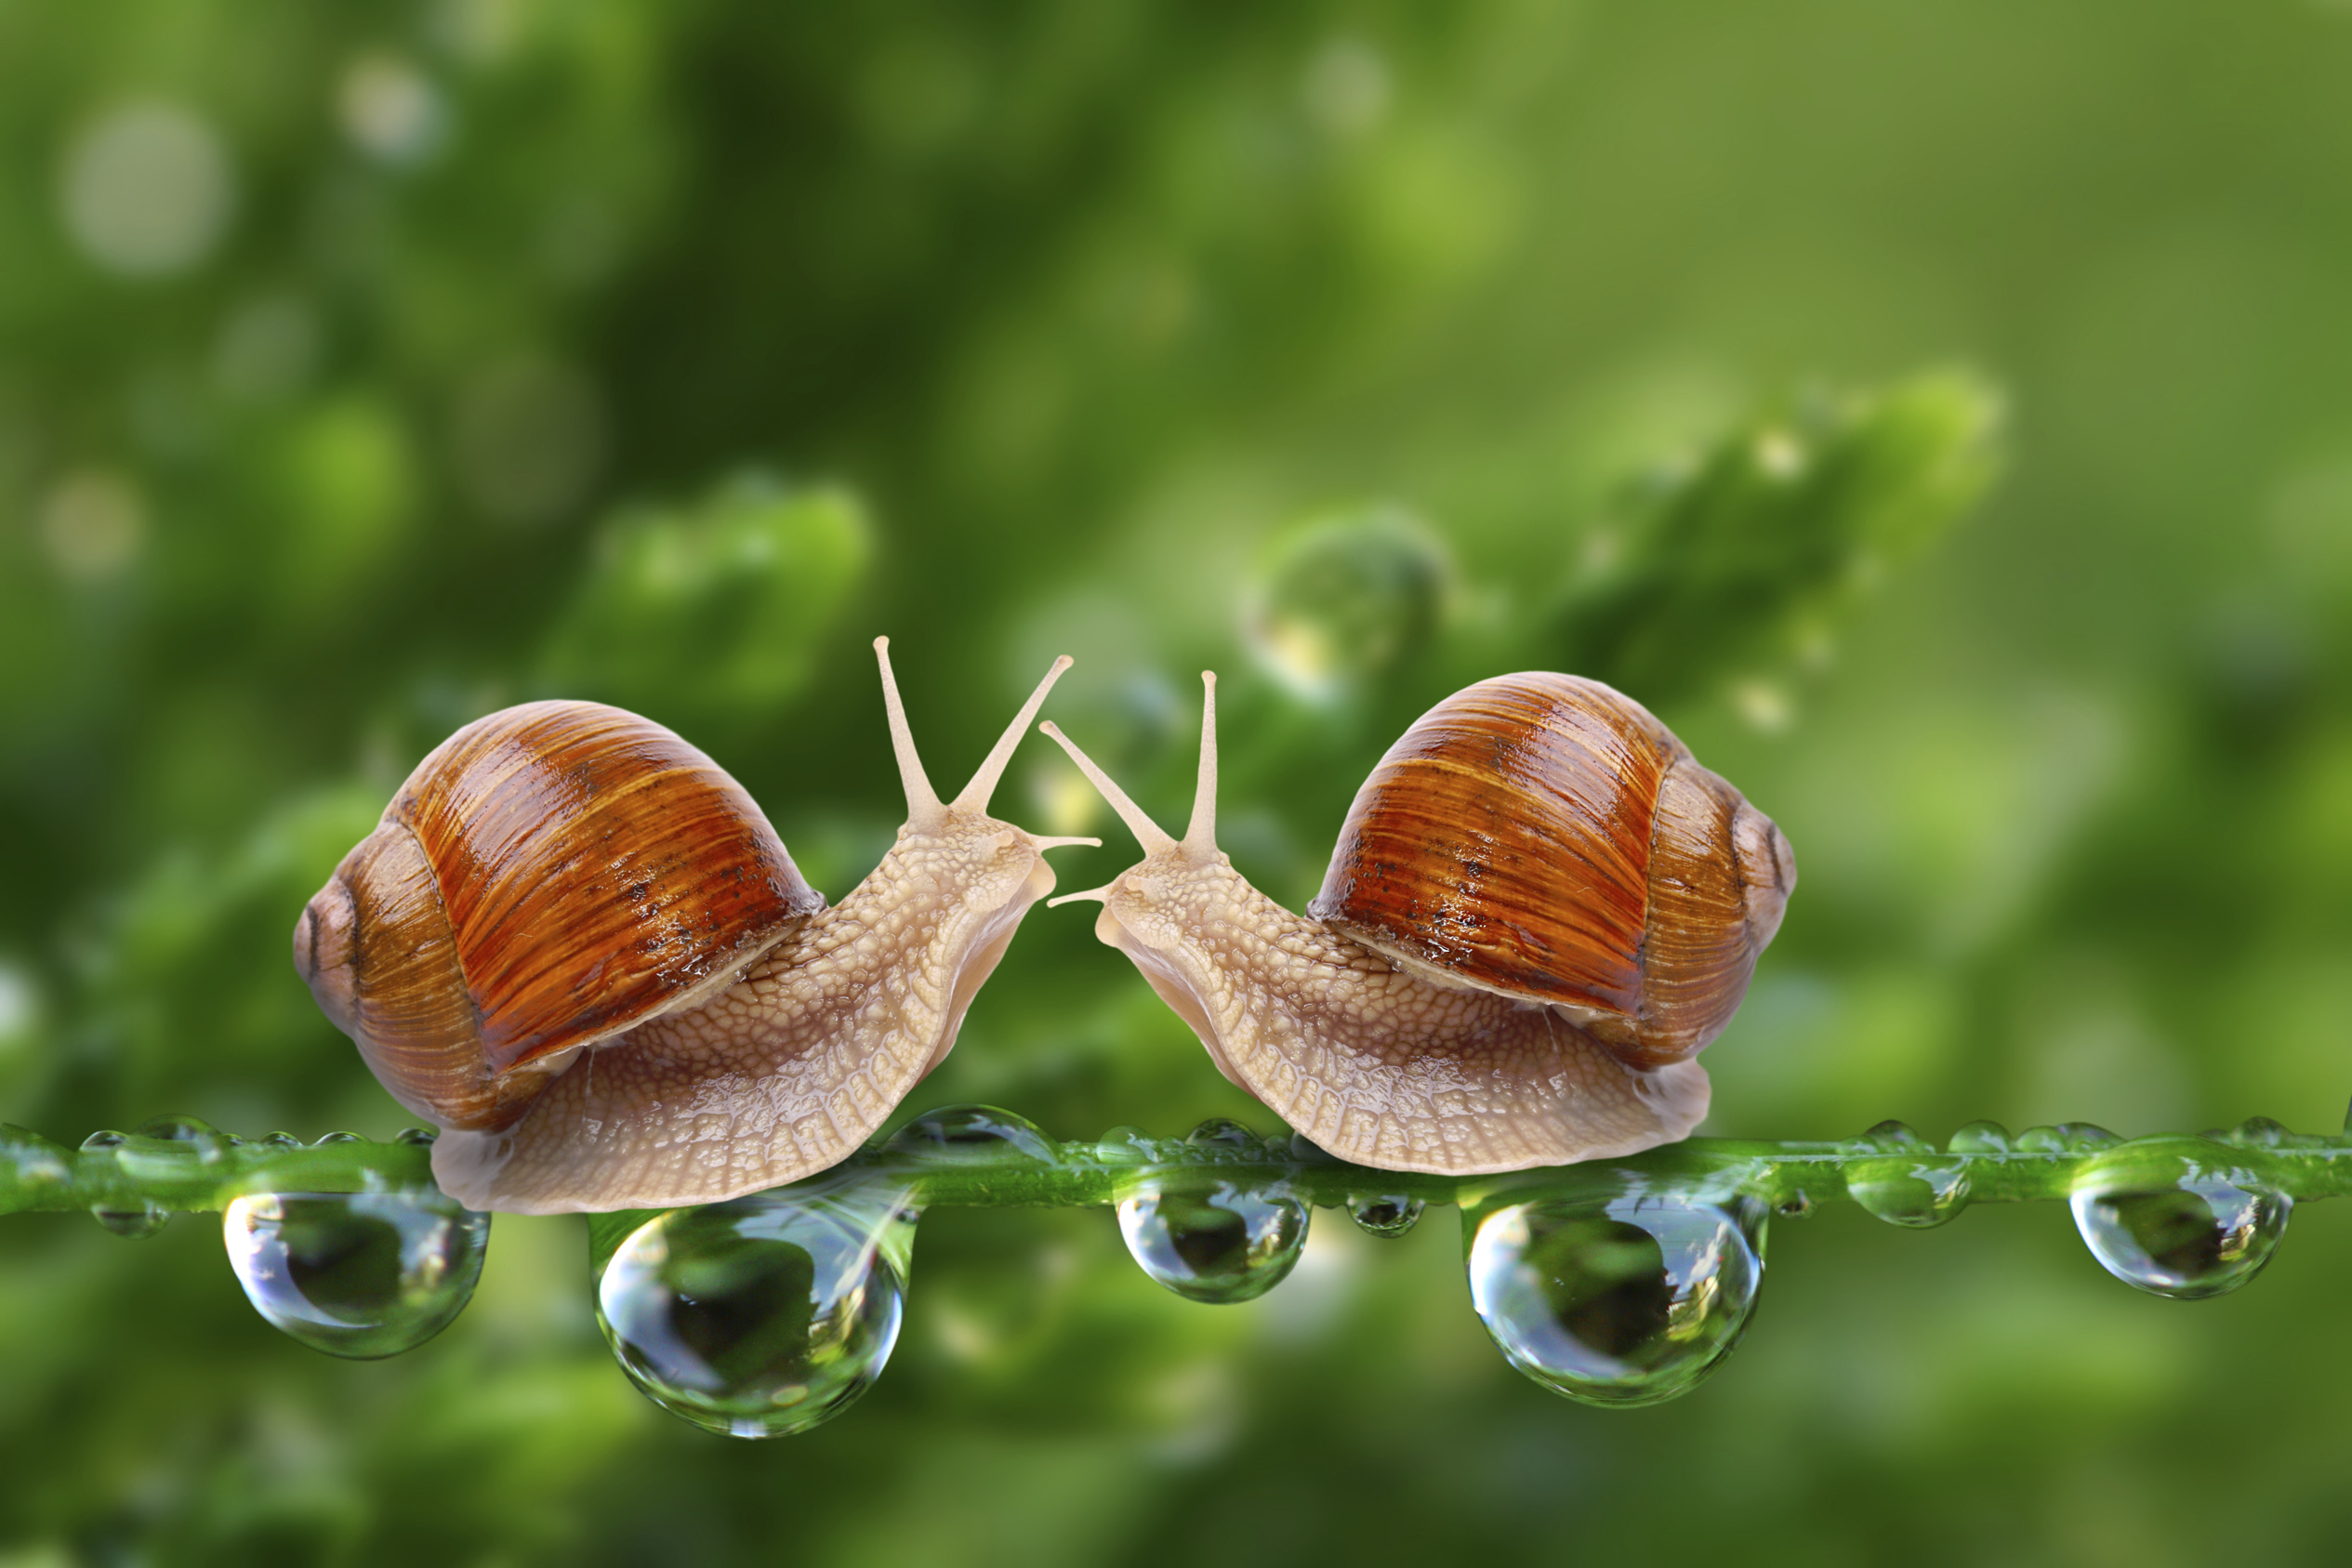 Two snails photo